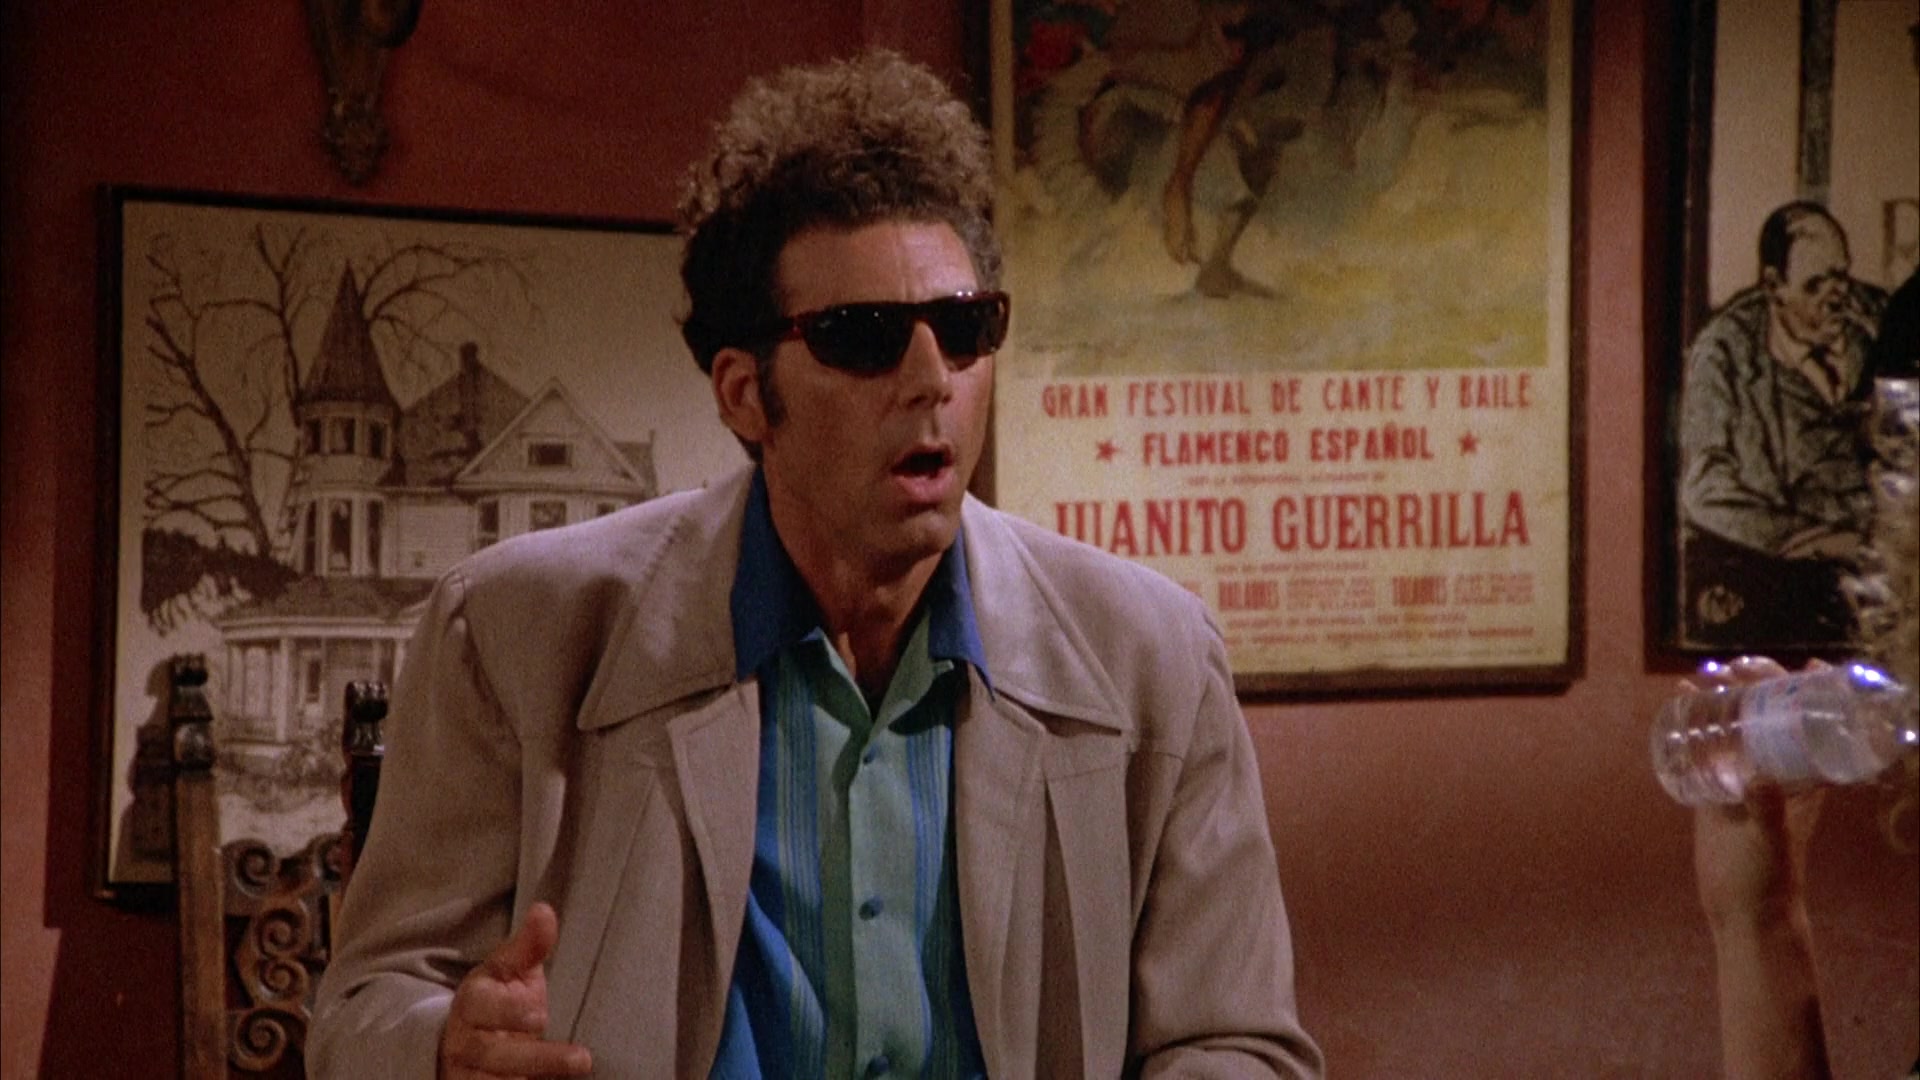 Ray-Ban Sunglasses Worn By Michael Richards As Cosmo Kramer In Seinfeld  Season 4 Episode 1 "The Trip (Part 1)" (1992)